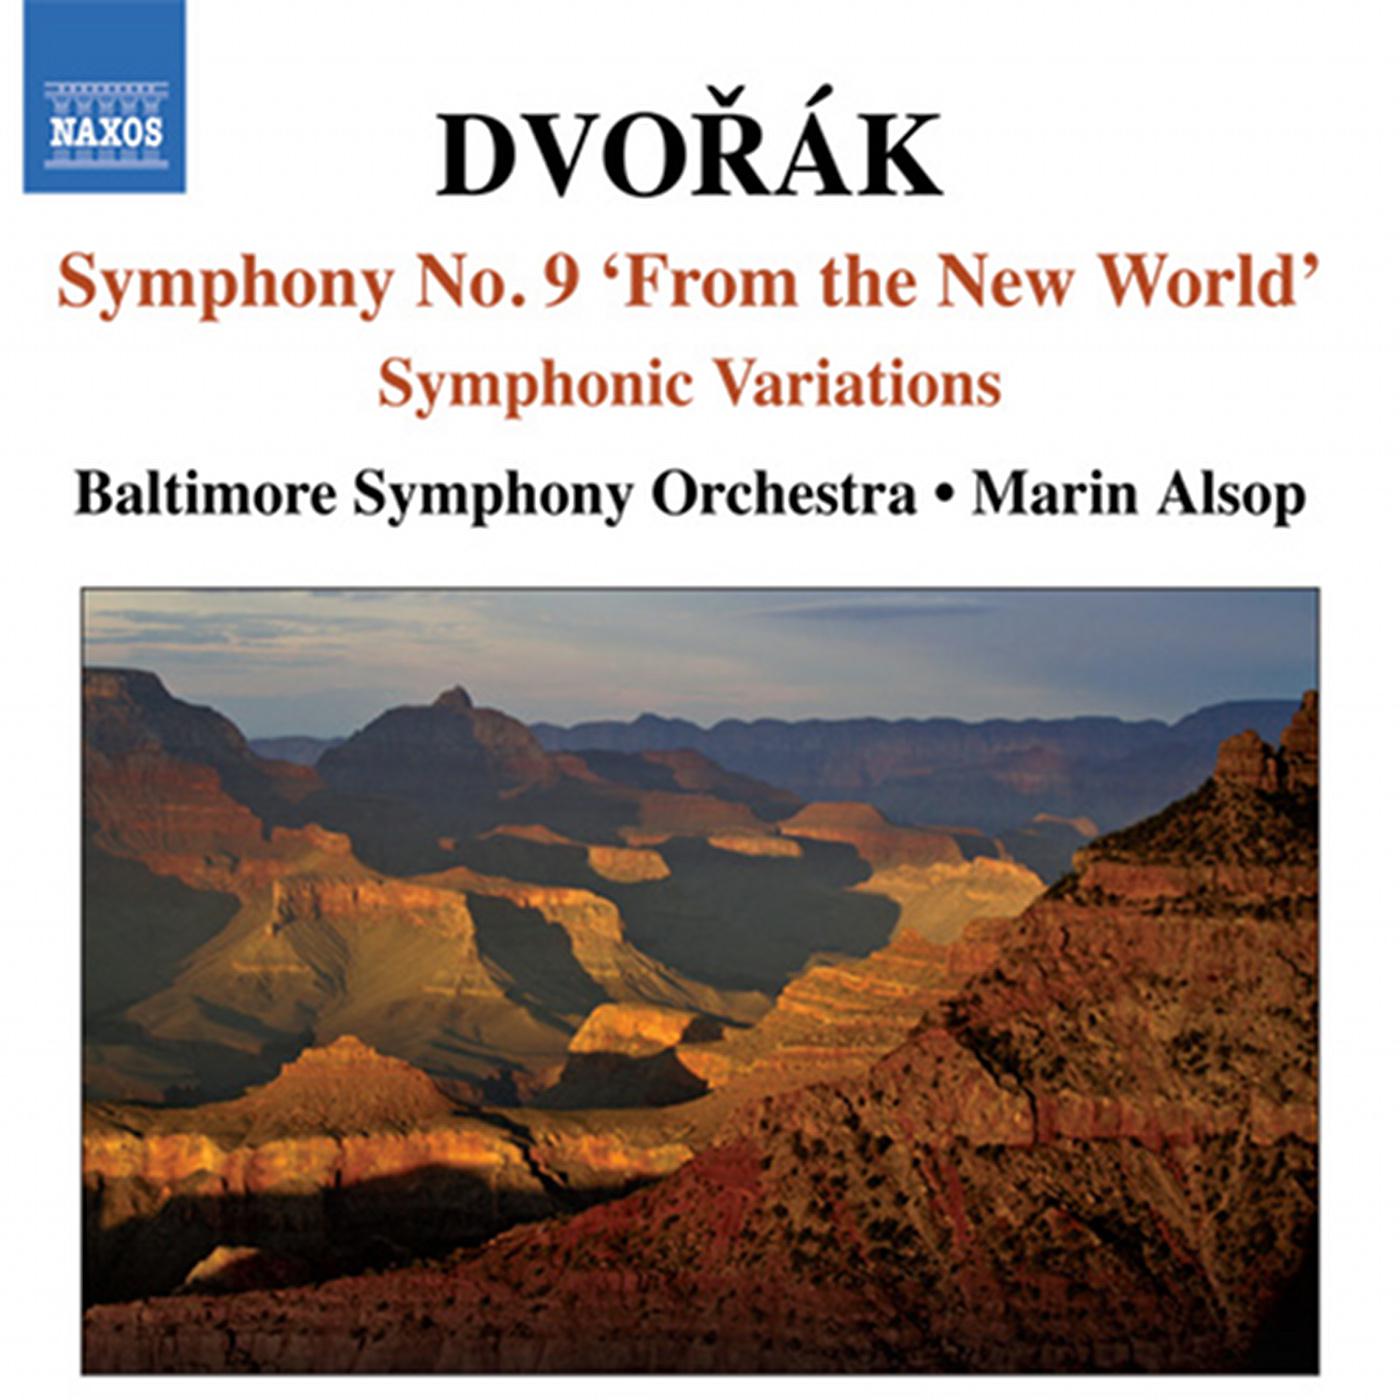 Symphony No. 9 in E Minor, Op. 95, B. 178, "From the New World": I. Adagio - Allegro molto Symphony No. 9 in E Minor, Op. 95, B. 178, "From the New World"